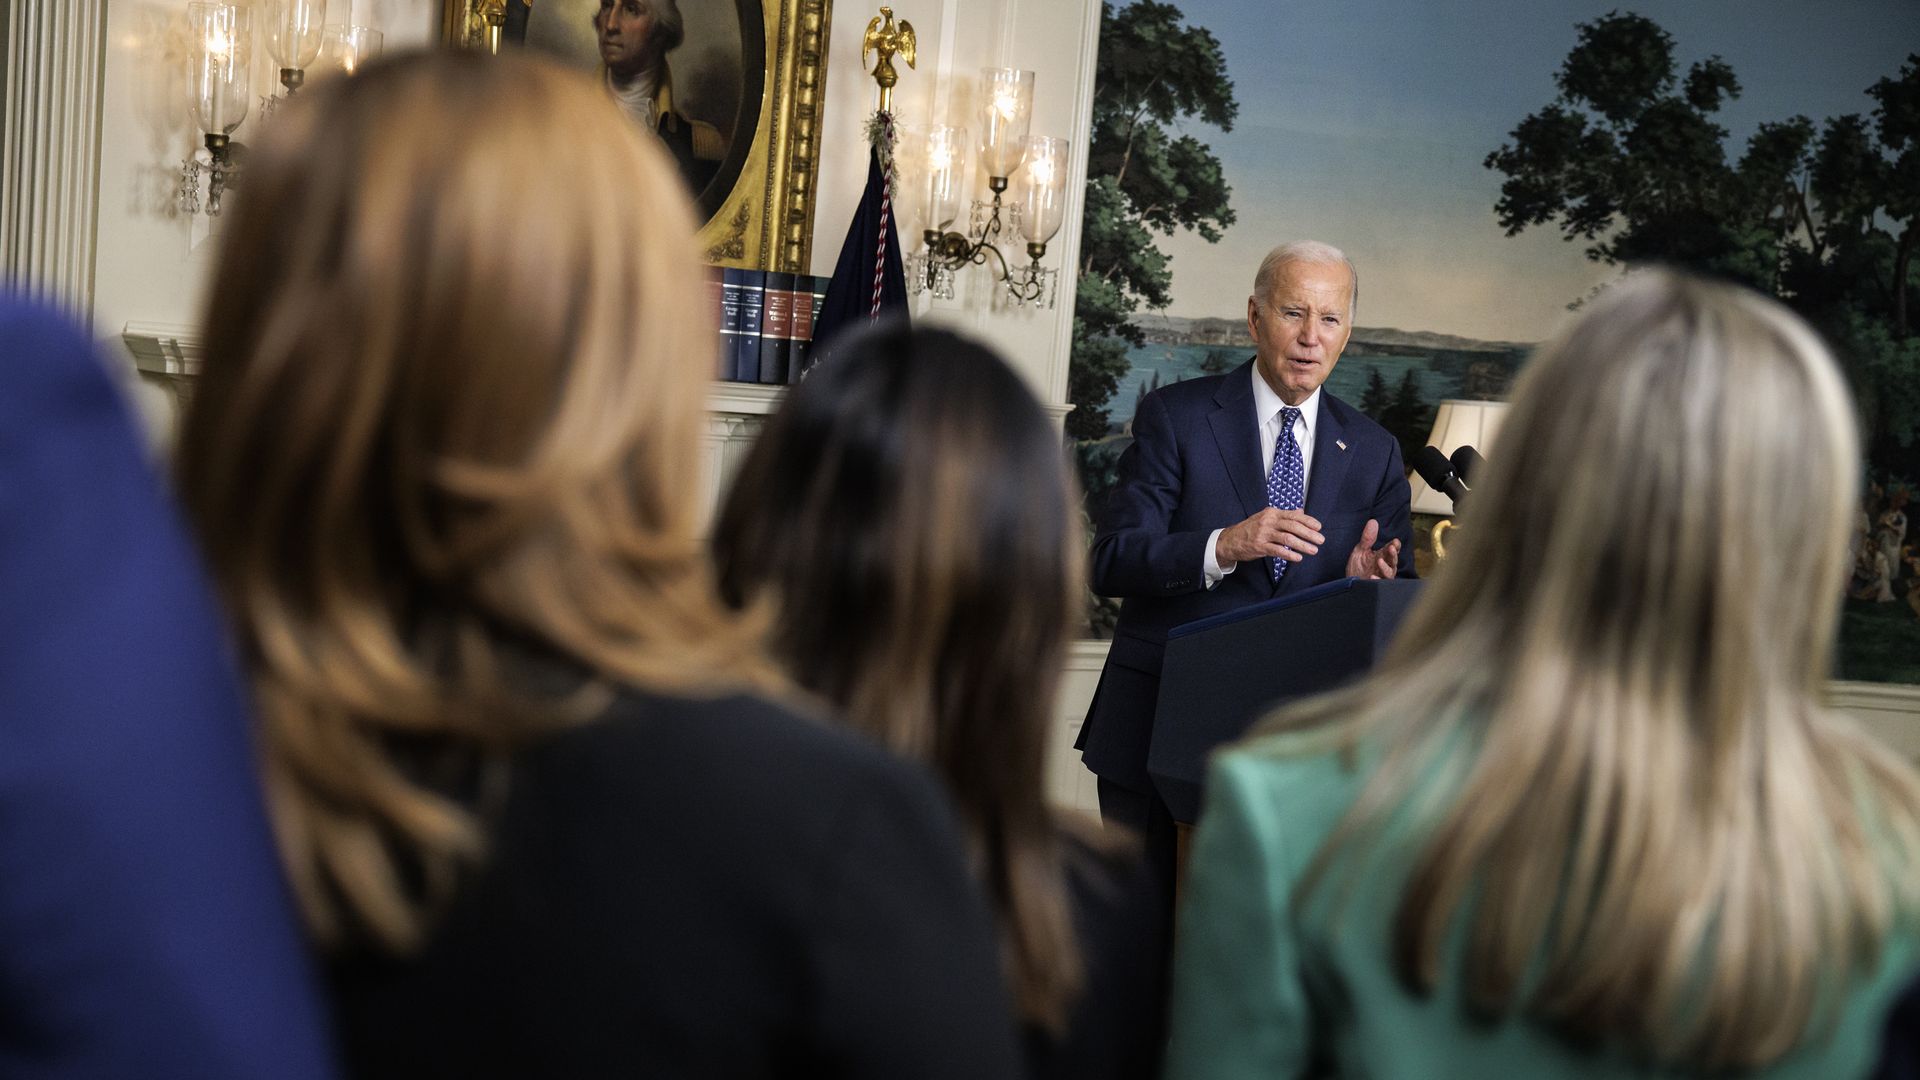 President Biden answers questions at a press conference